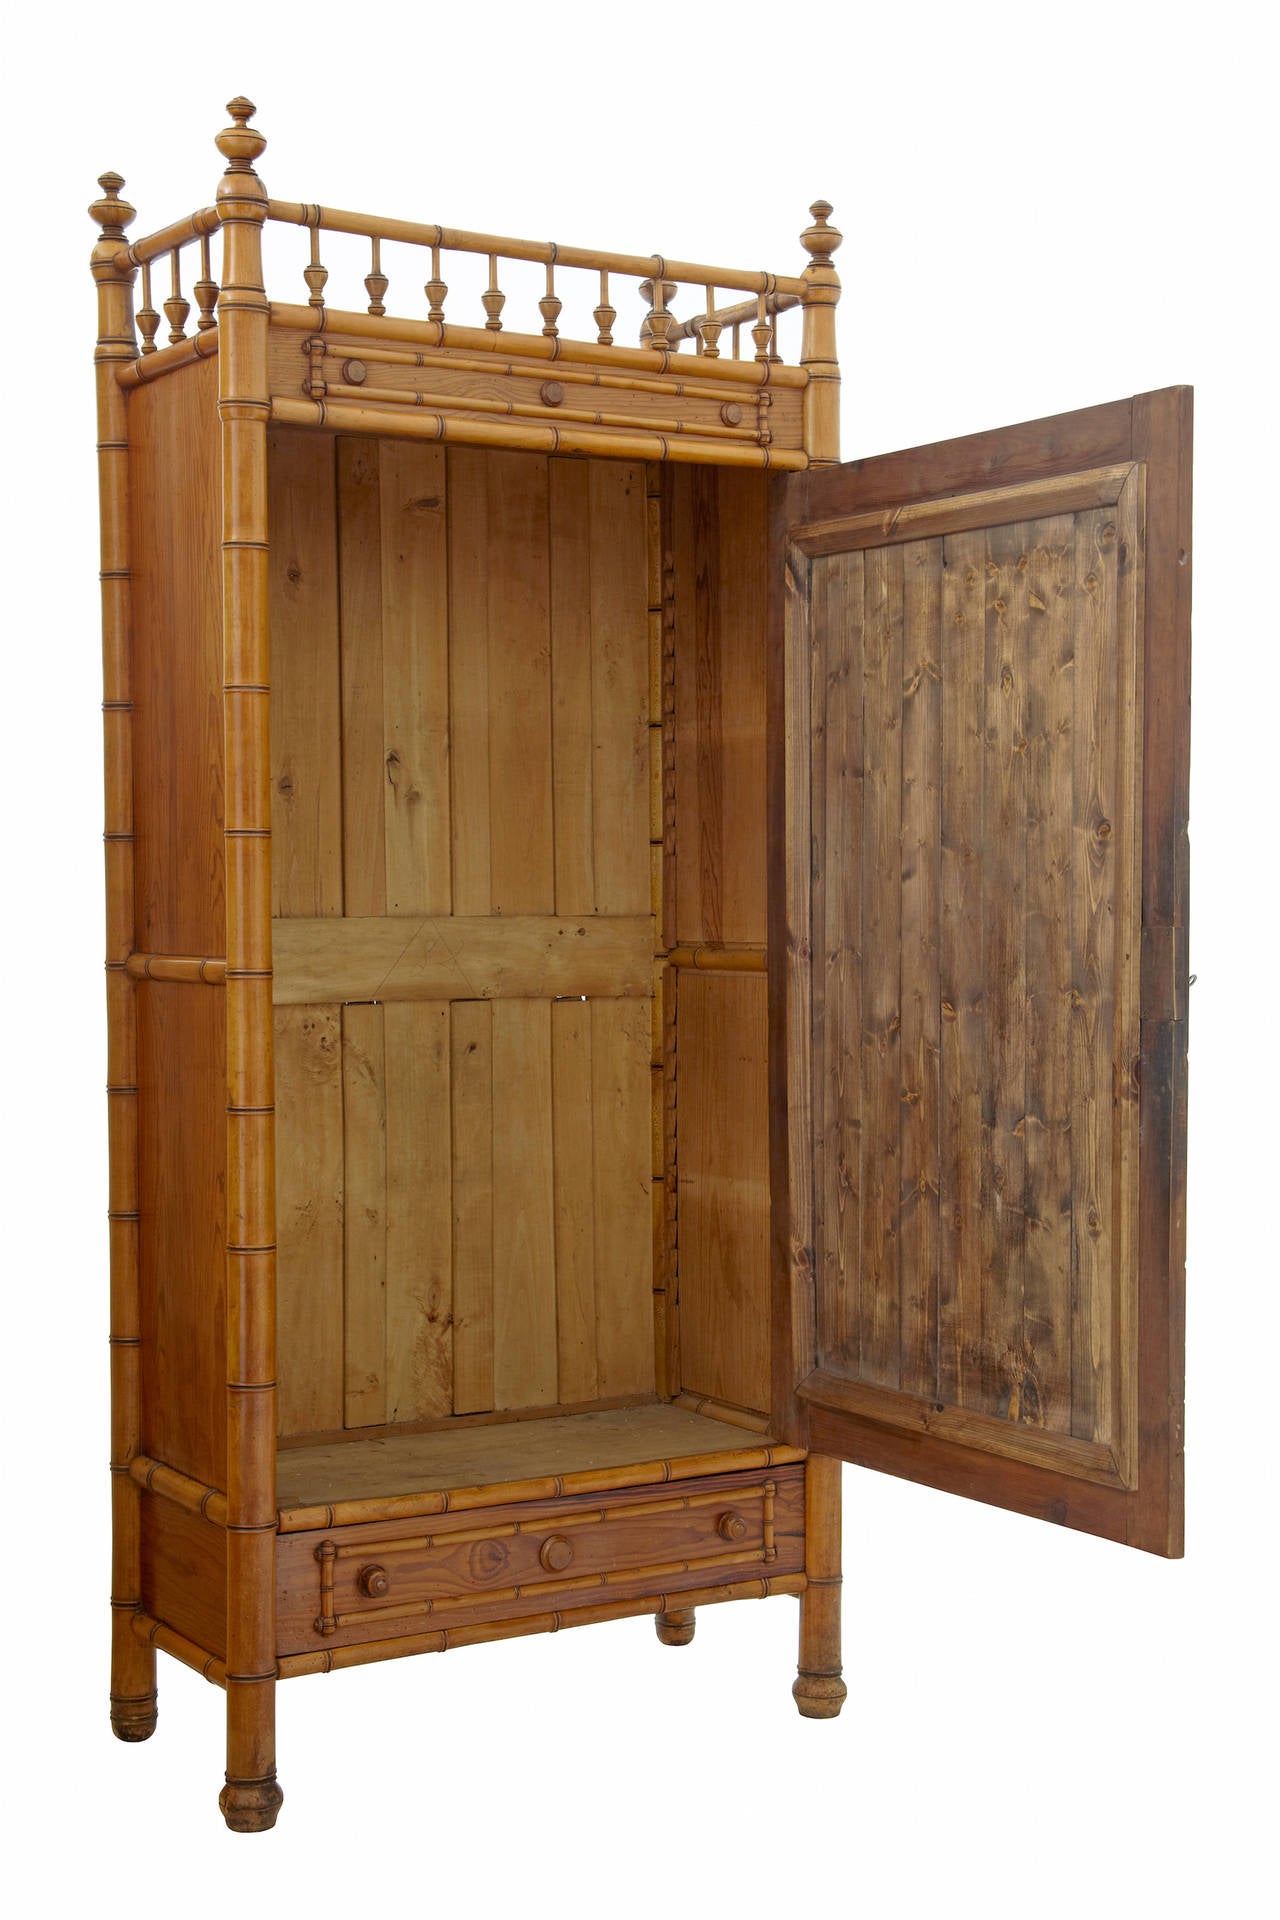 Stylish piece of french furniture circa 1880.
Original mirror to the single door with drawer below.
Frame made from carved pine faux bamboo with turnings to the top gallery.
Beautiful color and patina
Evidence of old treated worm

Fittings for